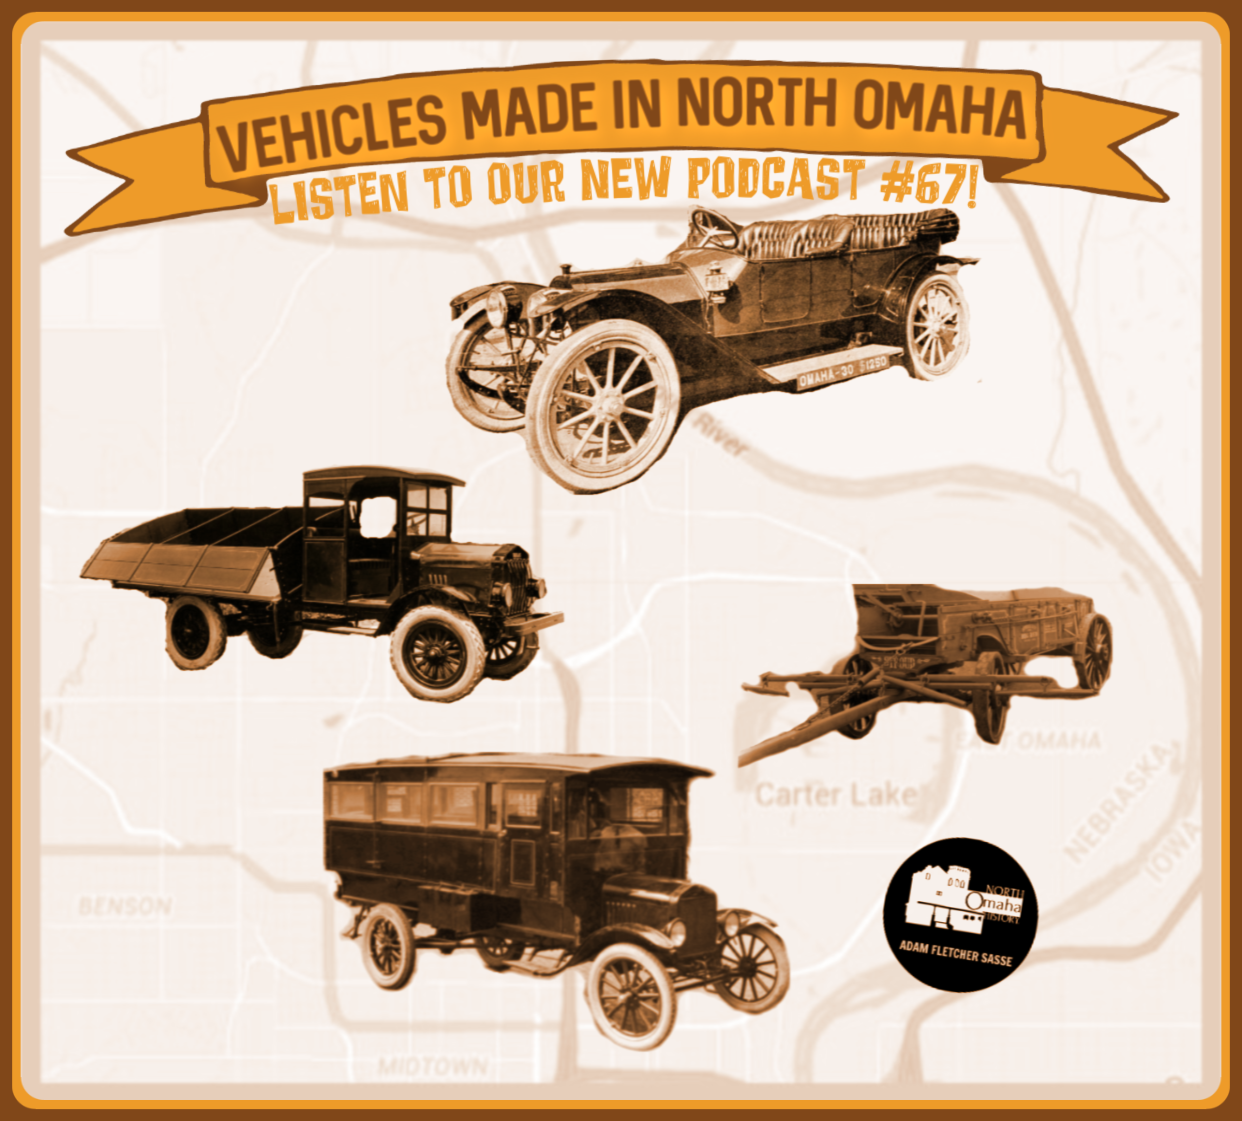 A History of Vehicles Made in North Omaha podcast by Adam Fletcher Sasse